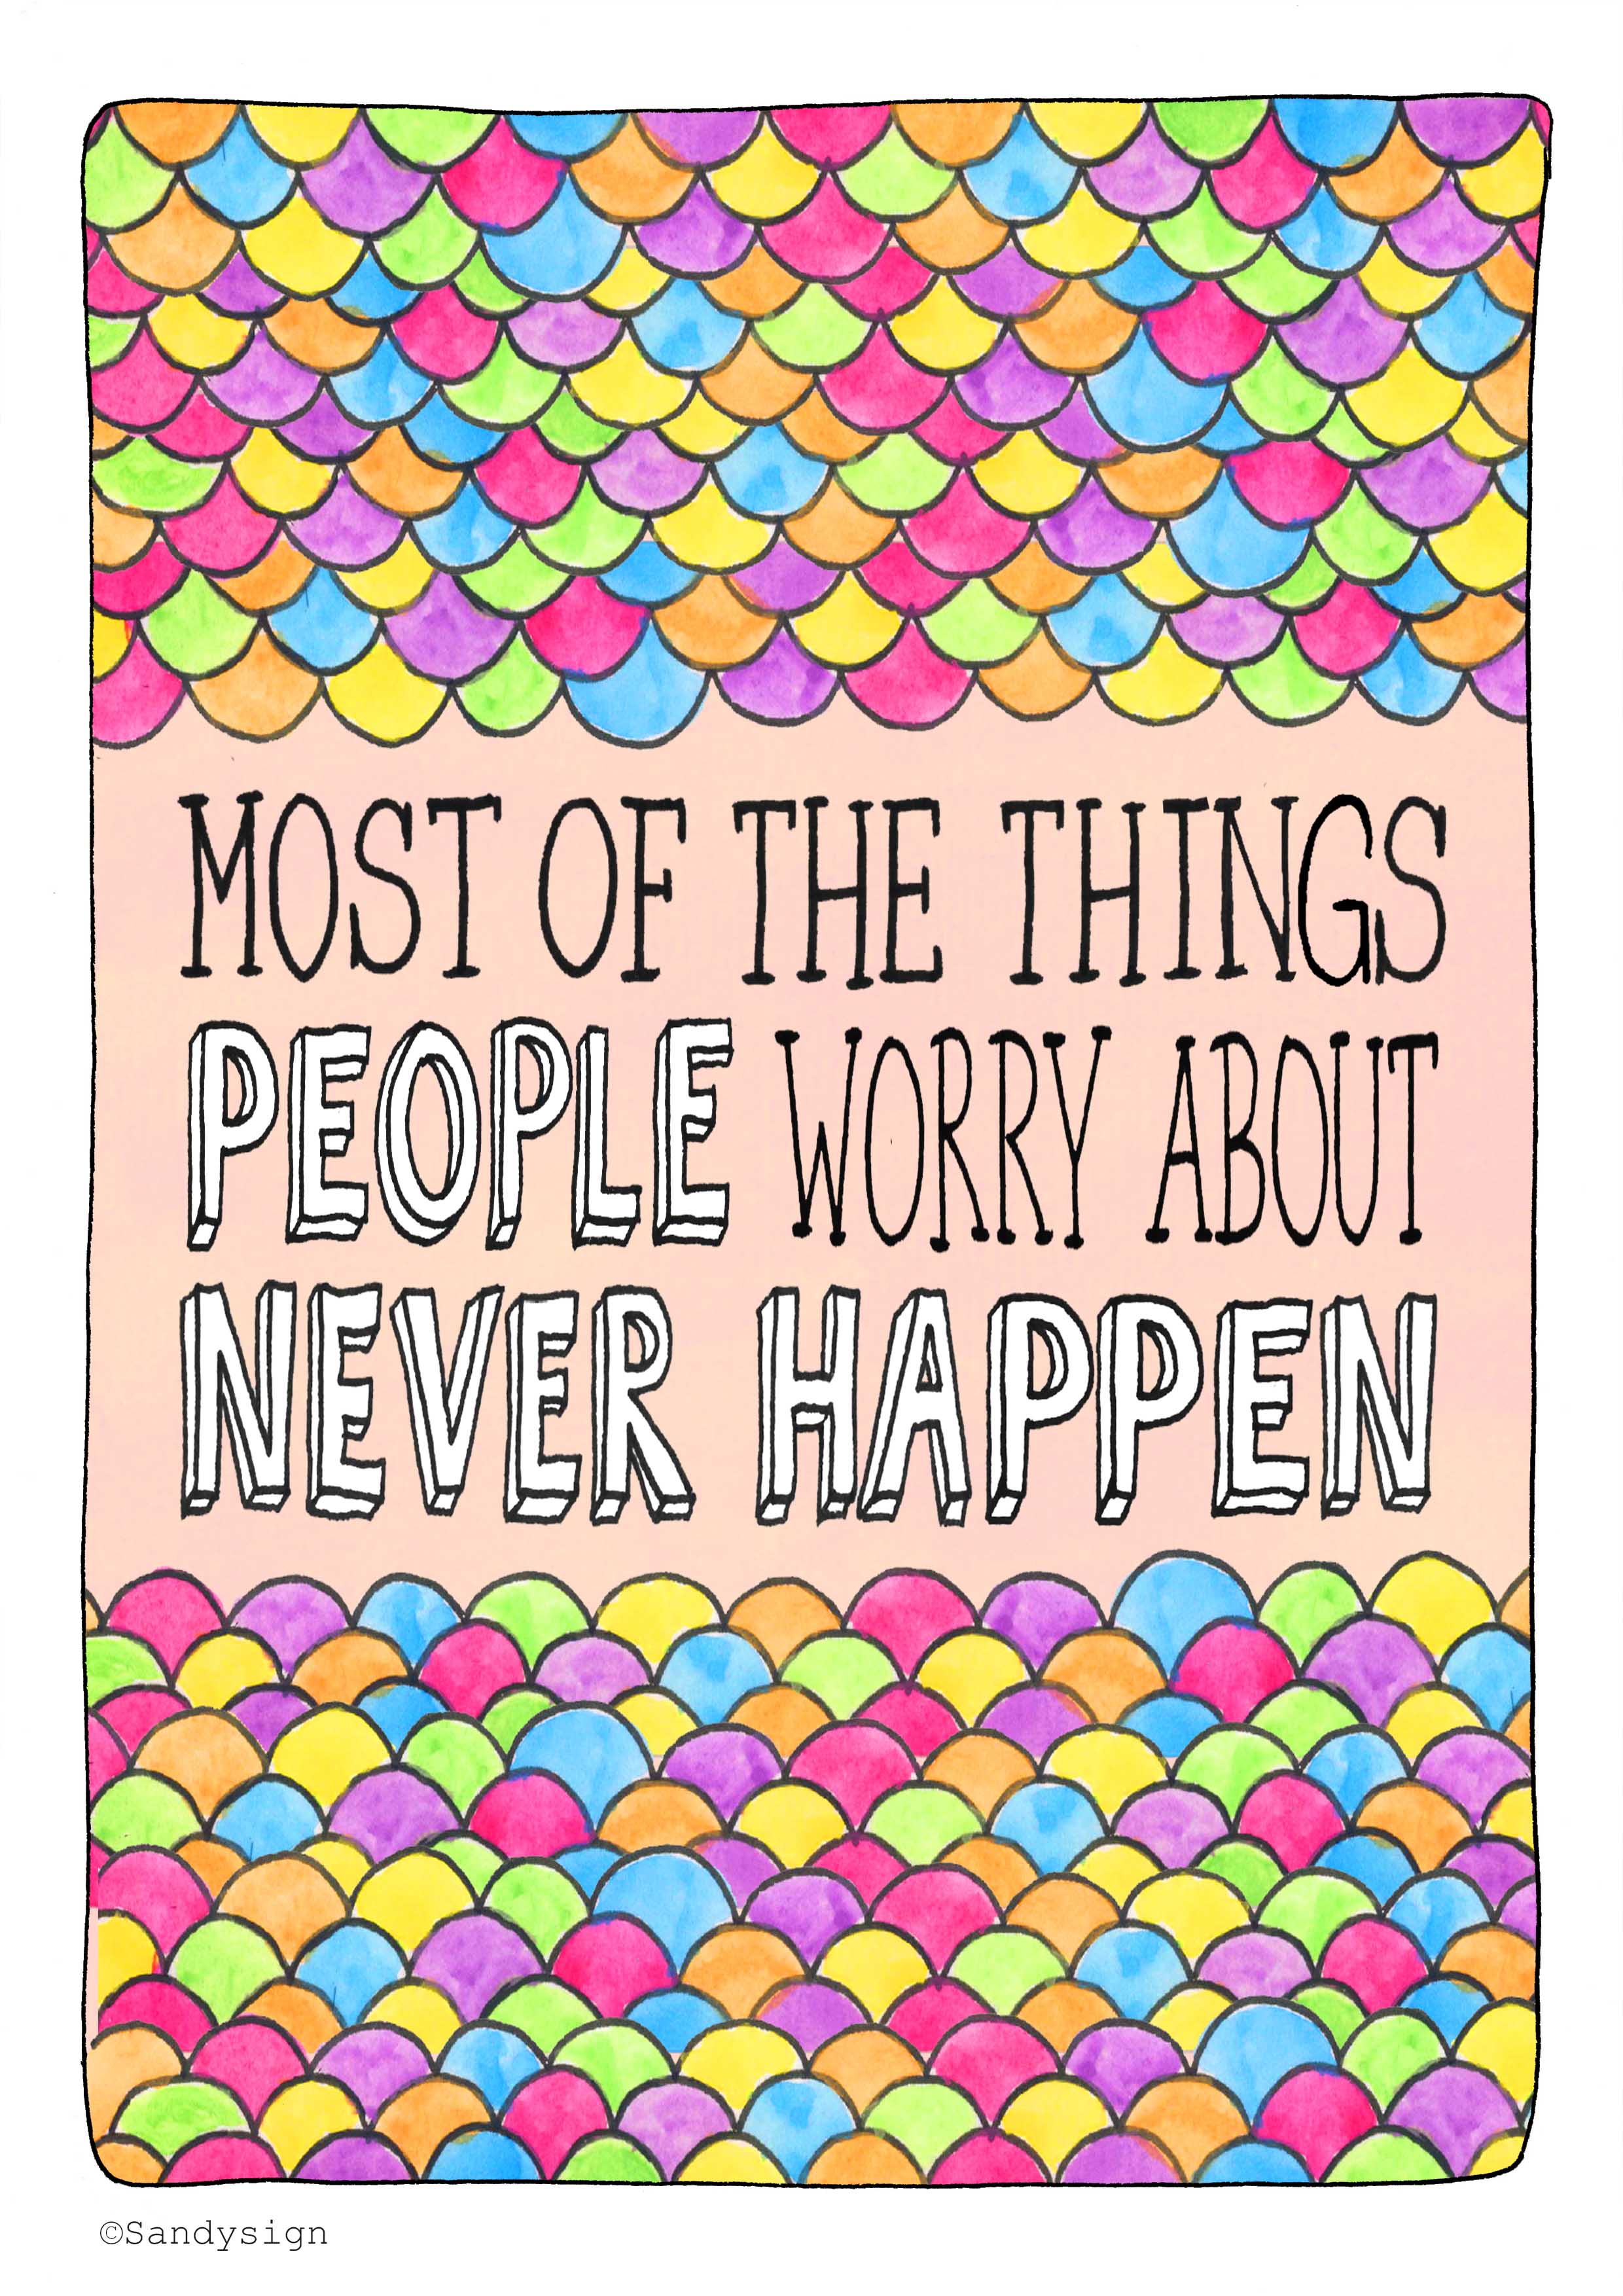 Most of the things people worry about never happen - sandysign.nl